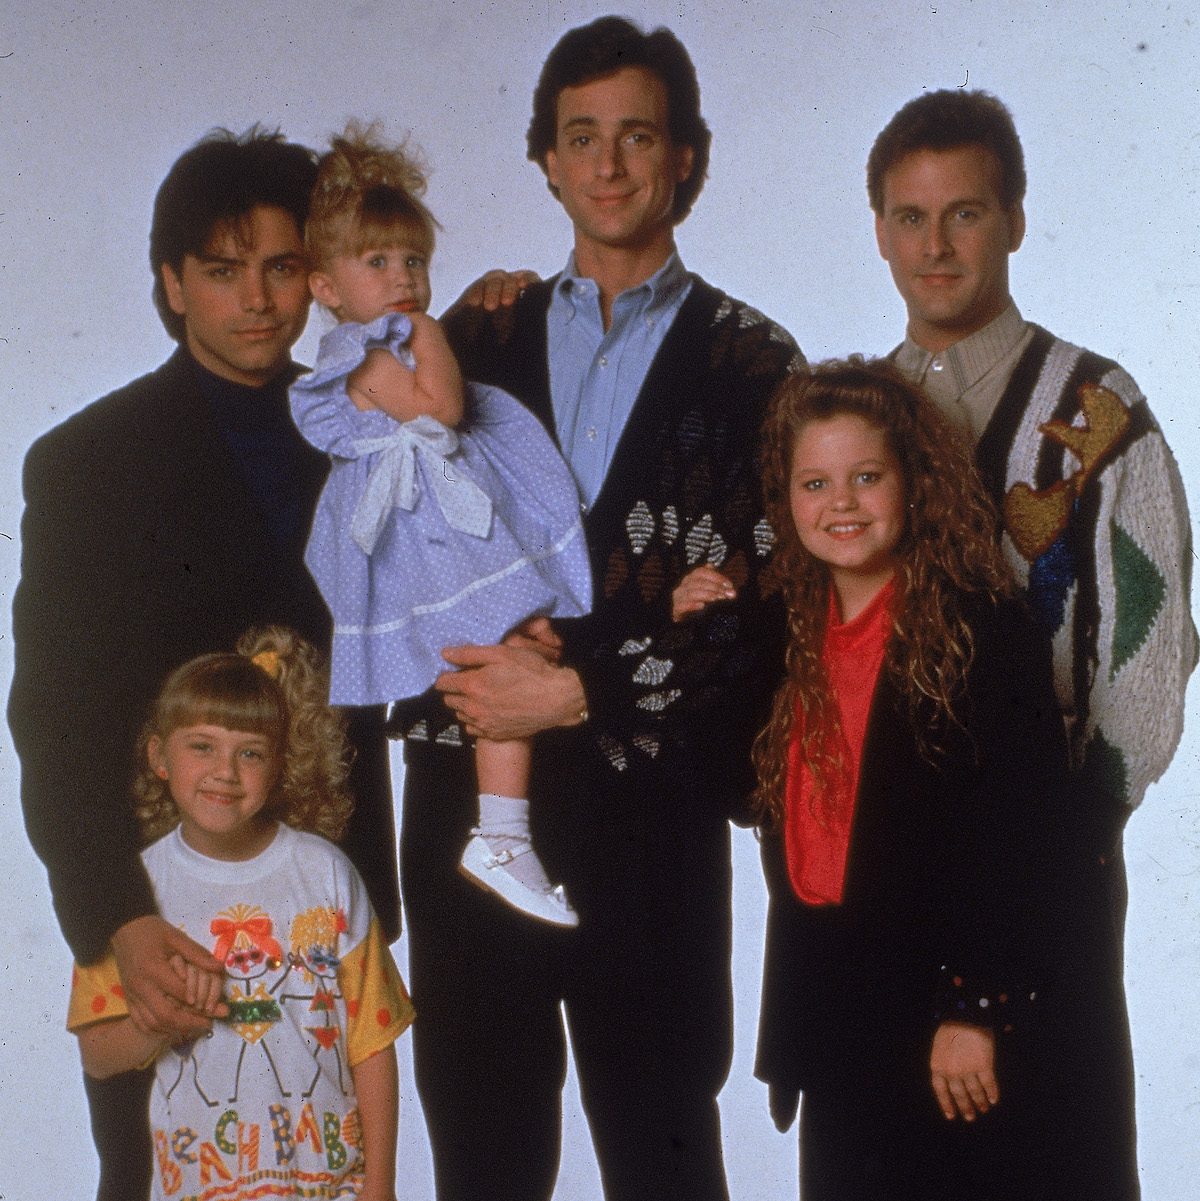 Portrait of the cast of the television program, 'Full House,' (left - right): John Stamos, Jodie Sweetin, Ashley or Mary-Kate Olsen, Bob Saget, Candace Cameron, and David Coulier, c. 1989.